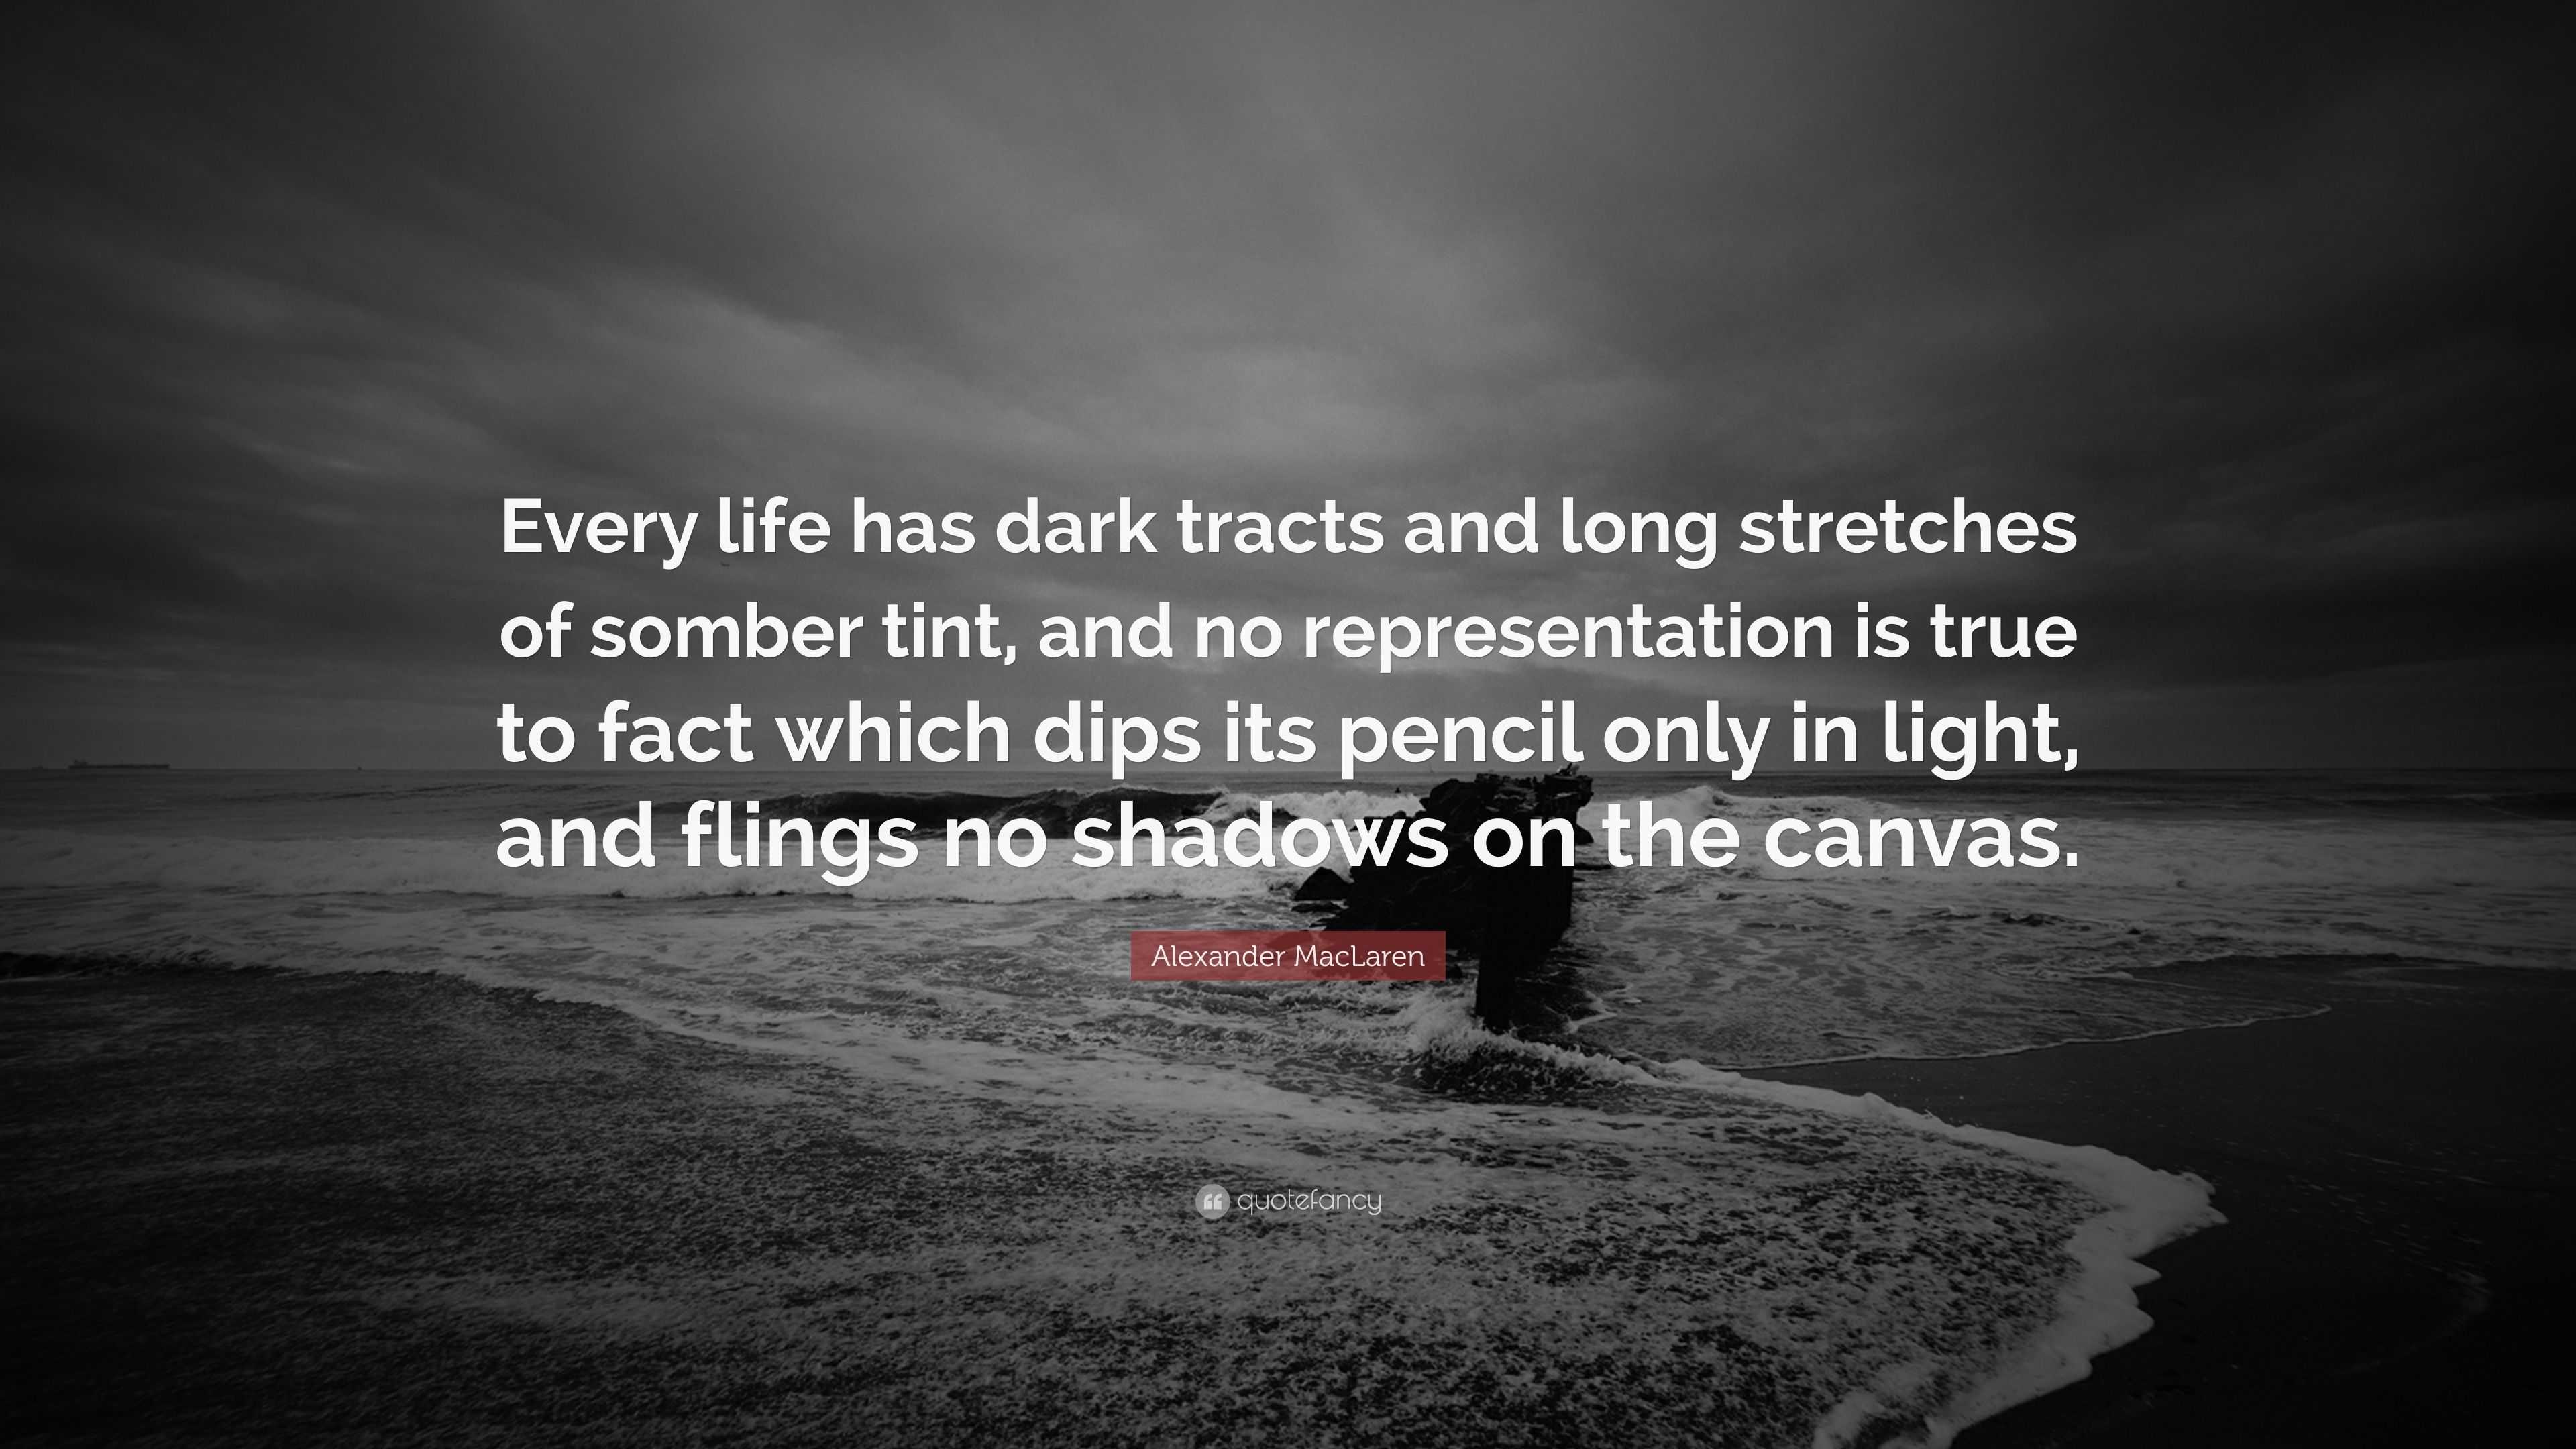 Alexander MacLaren Quote: “Every life has dark tracts and long ...